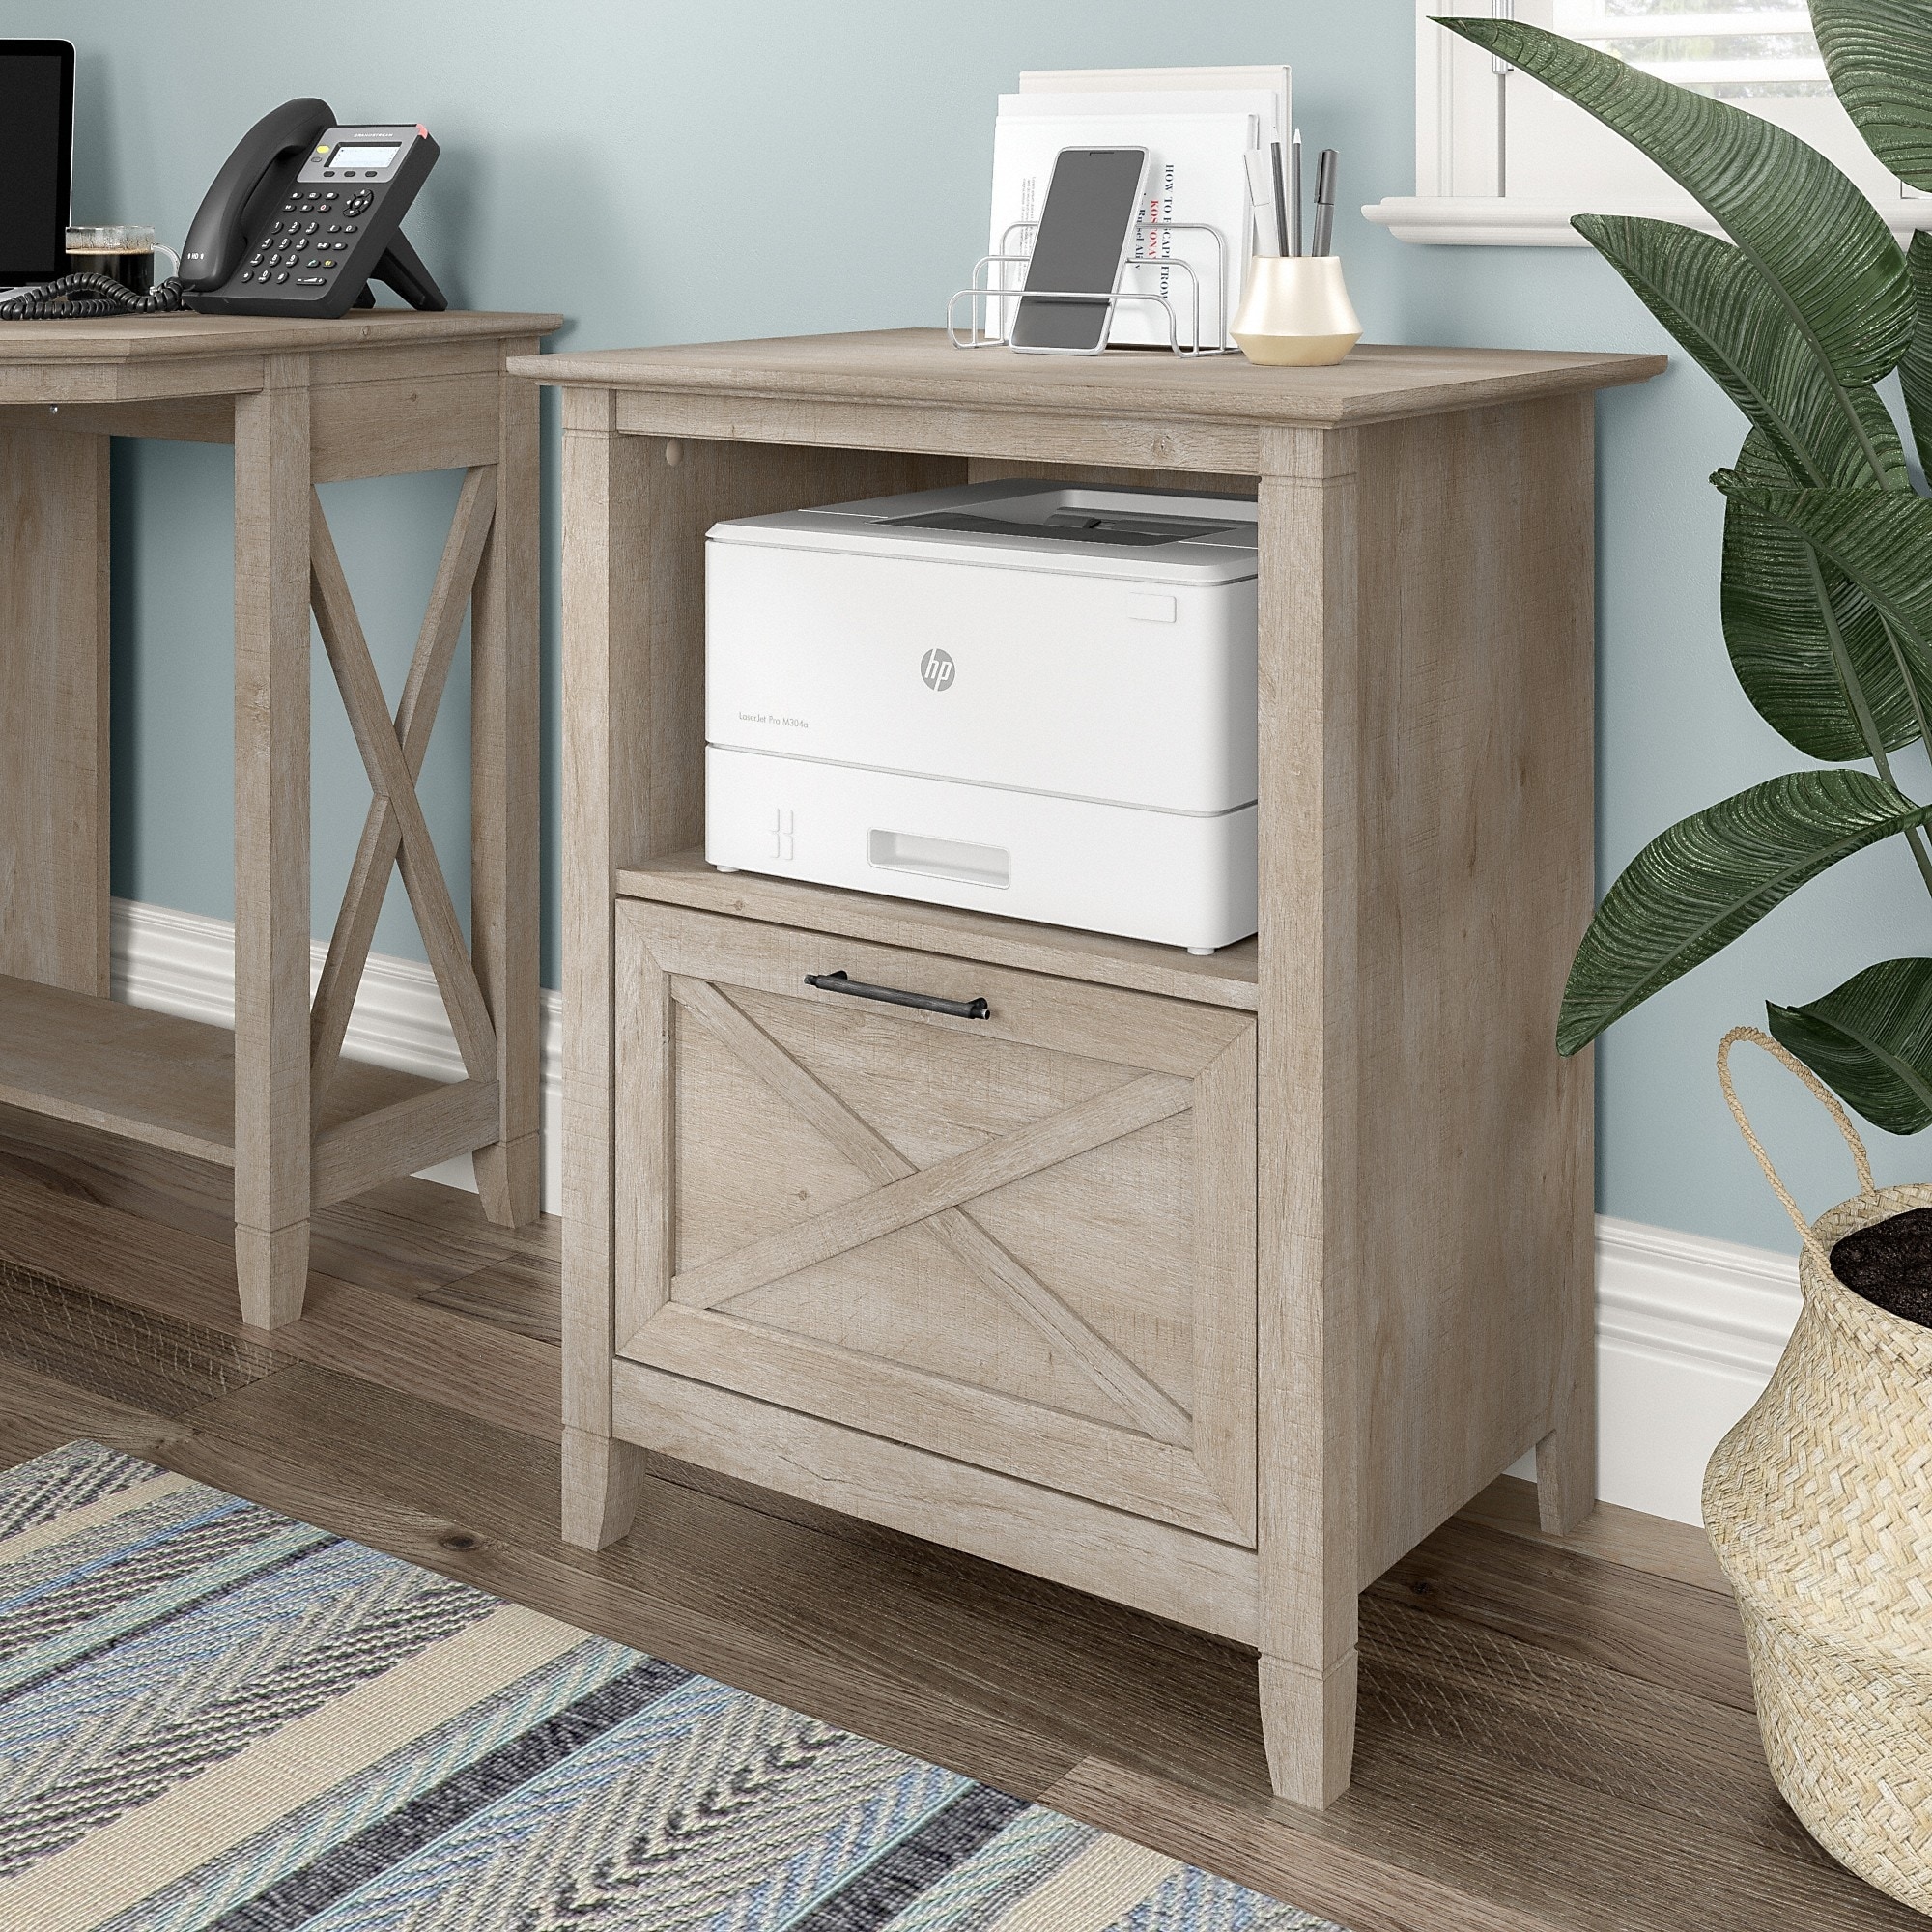 https://ak1.ostkcdn.com/images/products/is/images/direct/cd01d6b42e2fa39bd6a836ef02487043fd2d8cdc/Key-West-Lateral-File-Cabinet-with-Shelf-by-Bush-Furniture.jpg